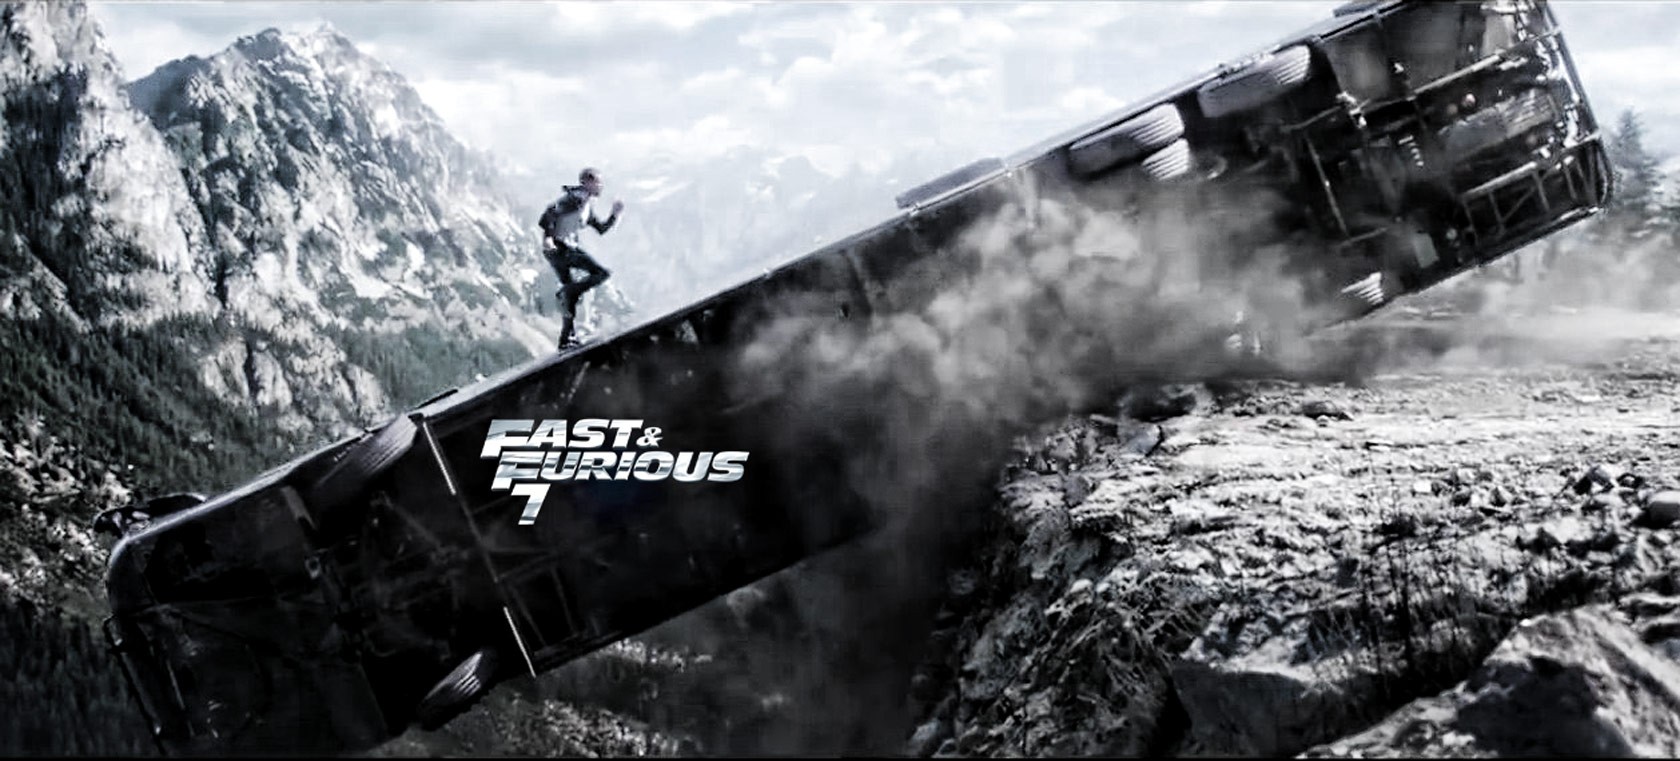 Fast And Furious Movie Action Trailer HD Wallpaper Search